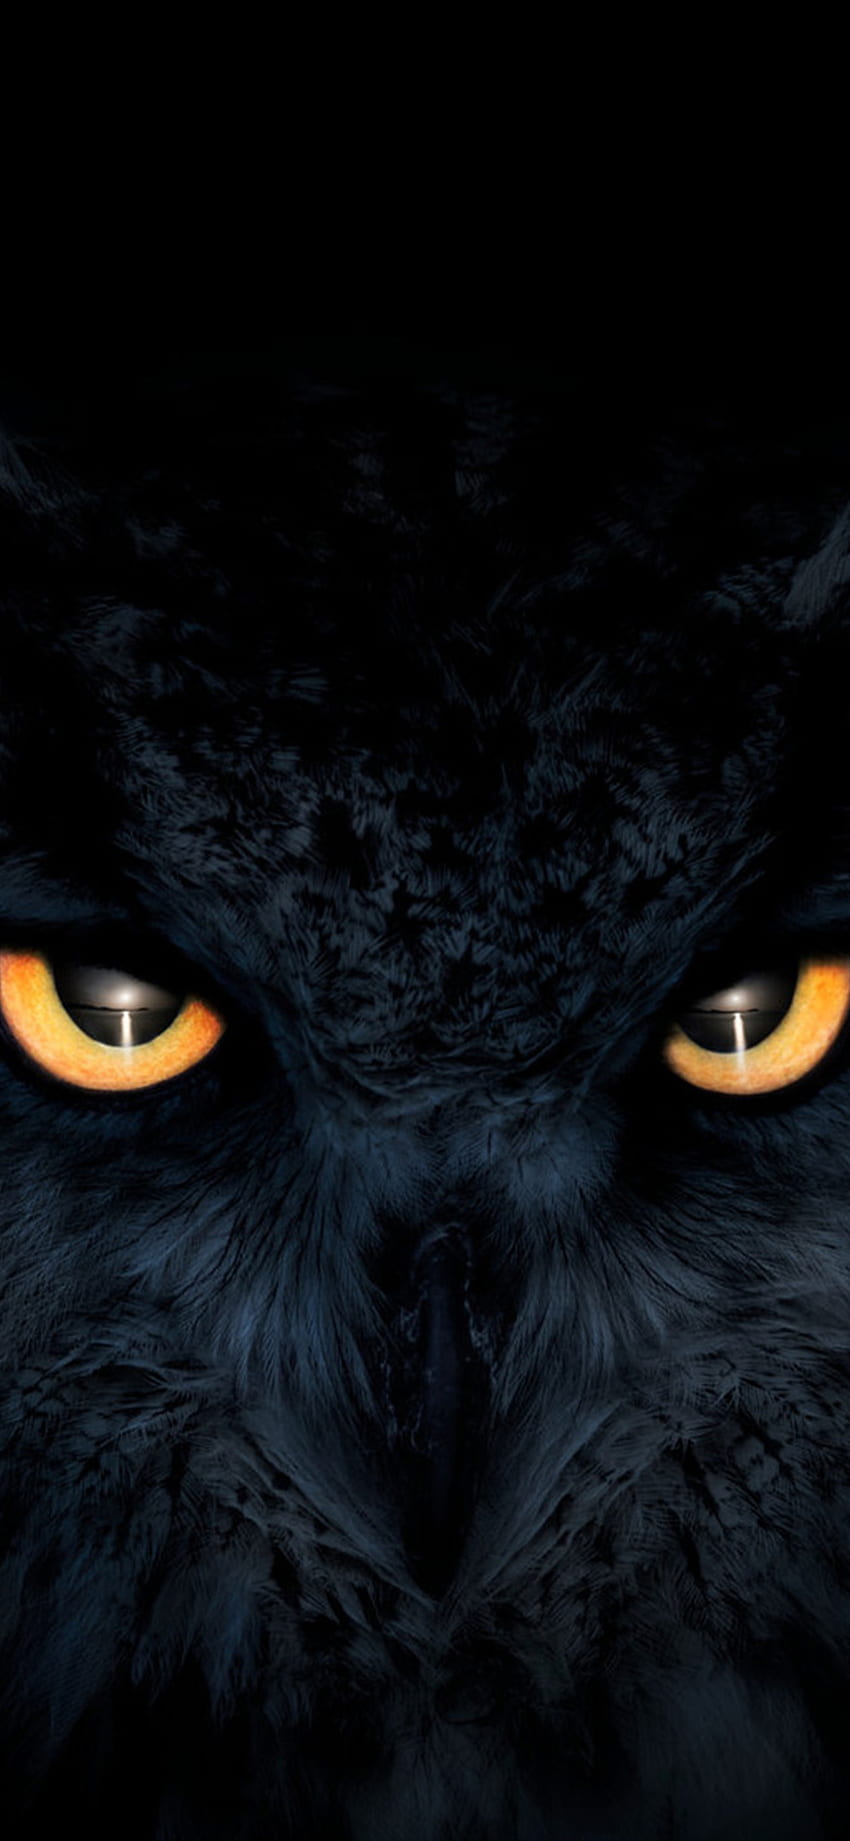 Why Owls Are a Spooky Symbol of Halloween, According to a Folklore Historian